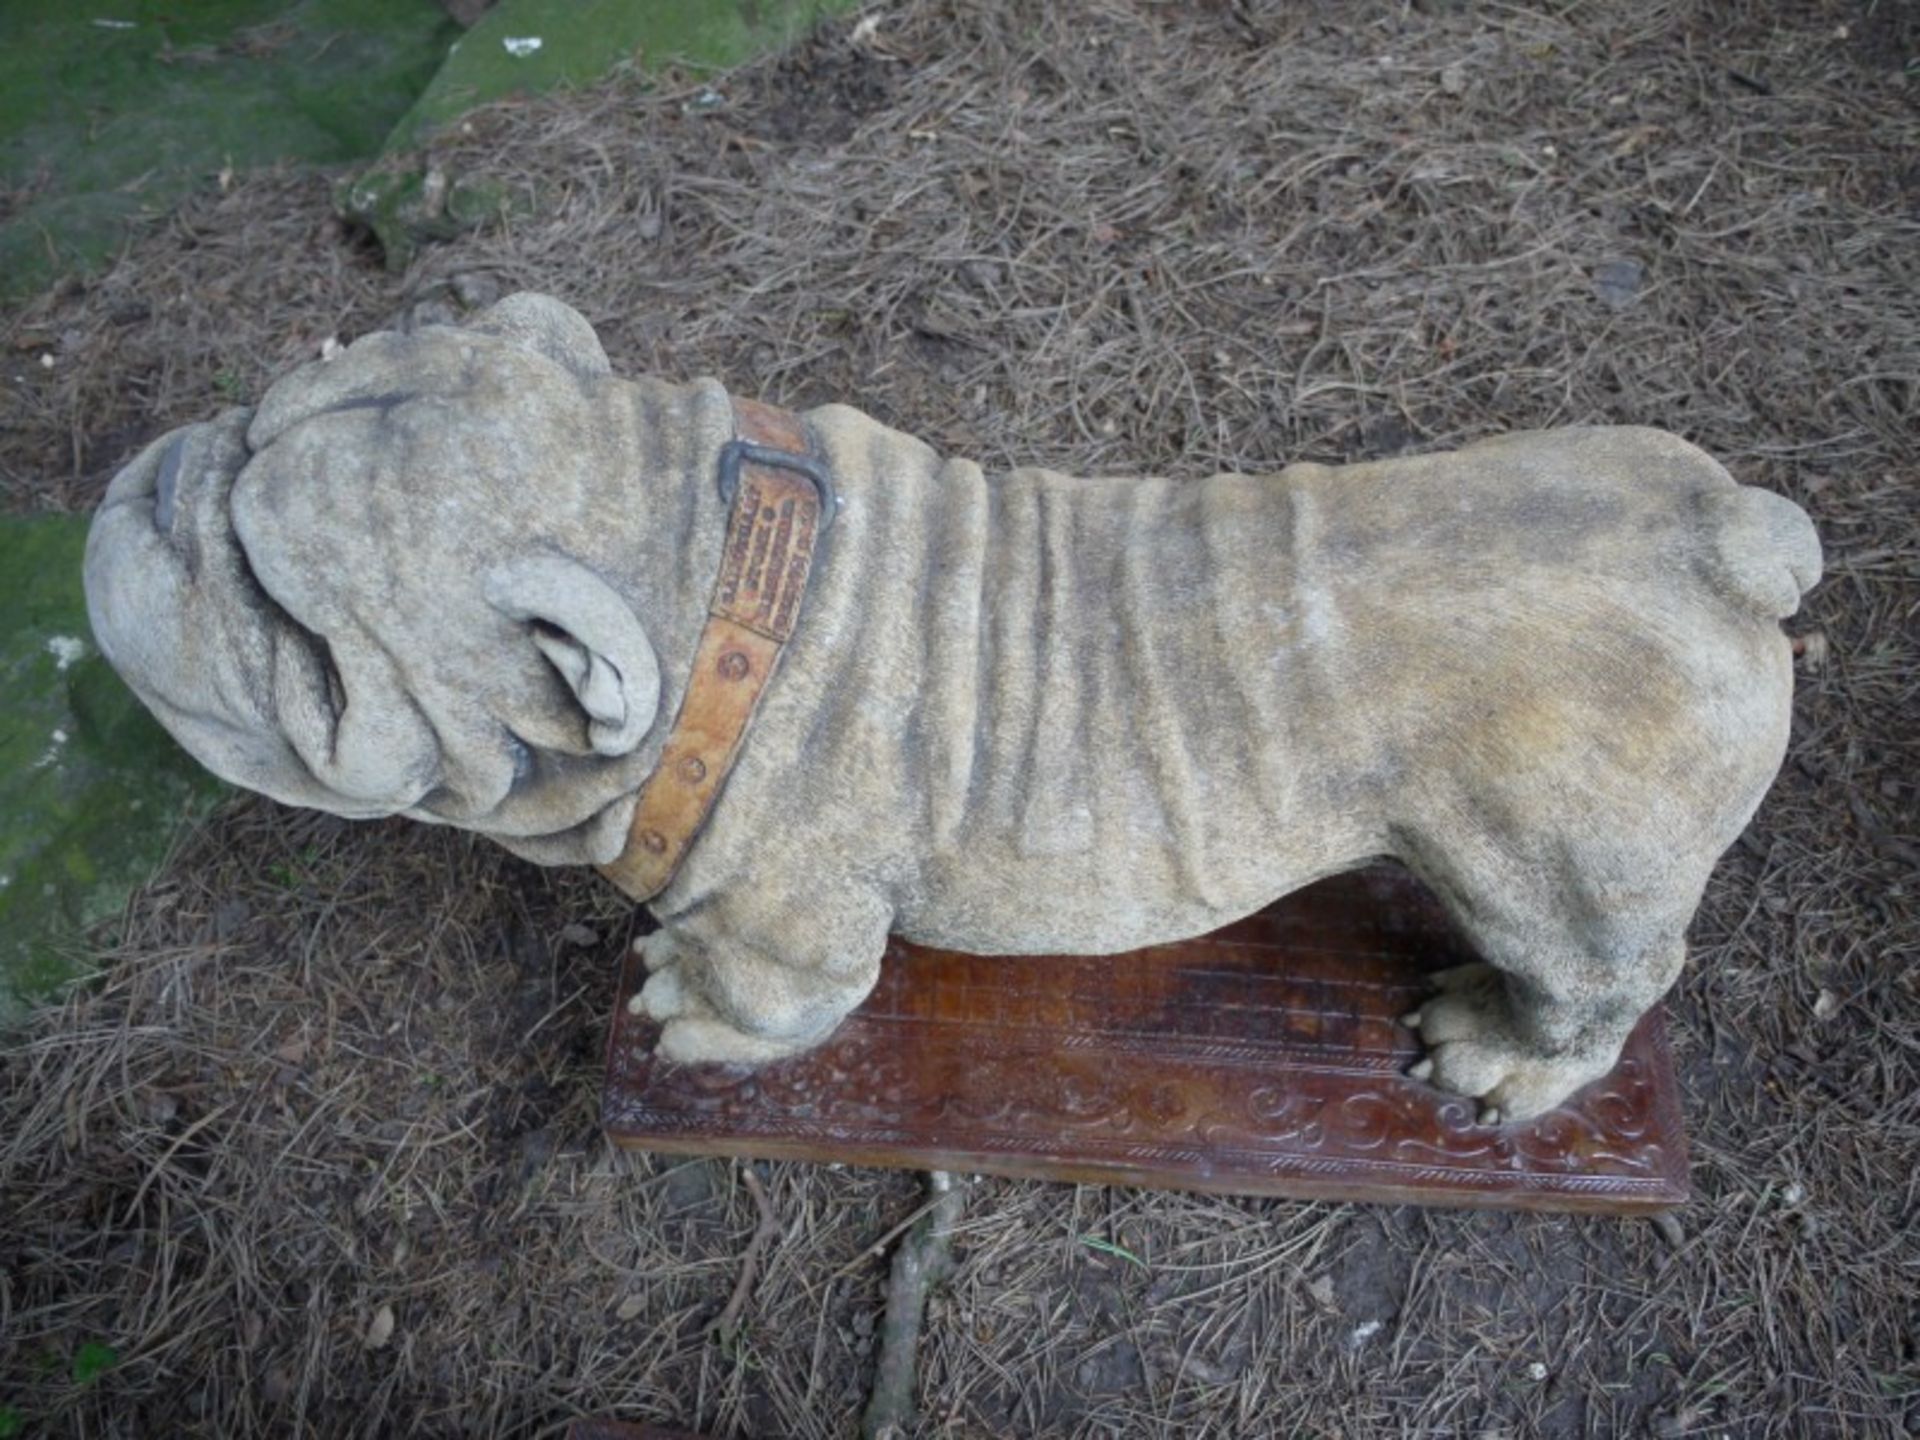 PAIR OF BULLDOGS   DIMENSIONS: Length: 65 cm Width: 33 cm Height: 40 cm   COLLECTION / VIEWING - Image 5 of 6